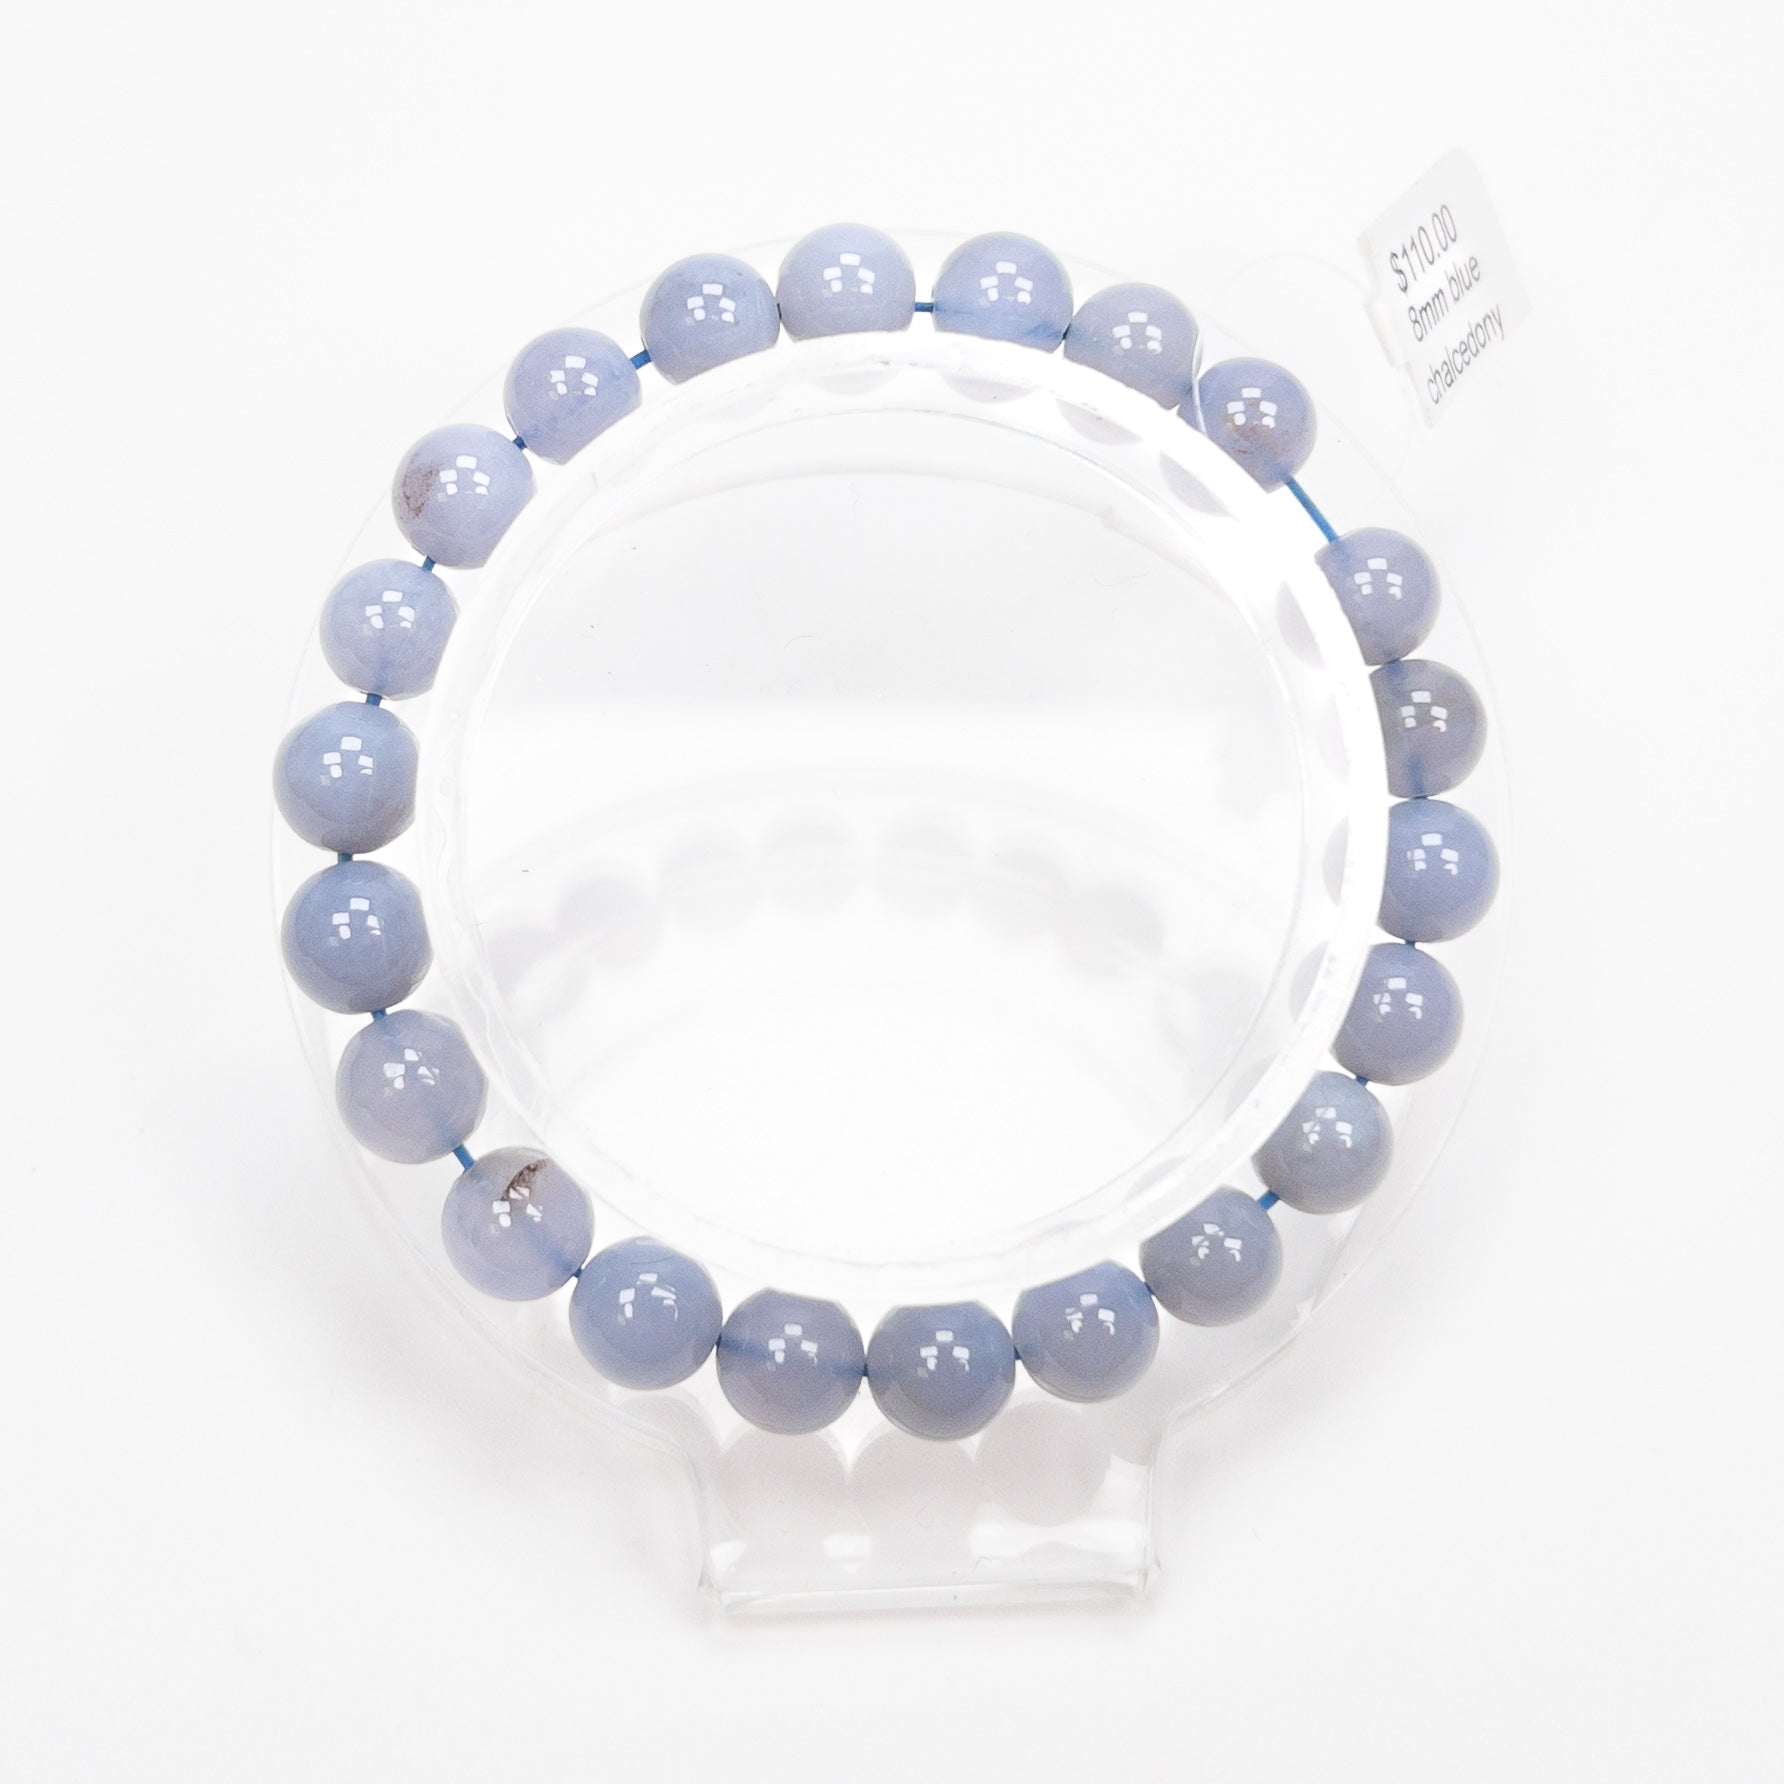 Blue Chalcedony 8mm Smooth Round Bead Stretchy Cord Bracelet - 1 pc.